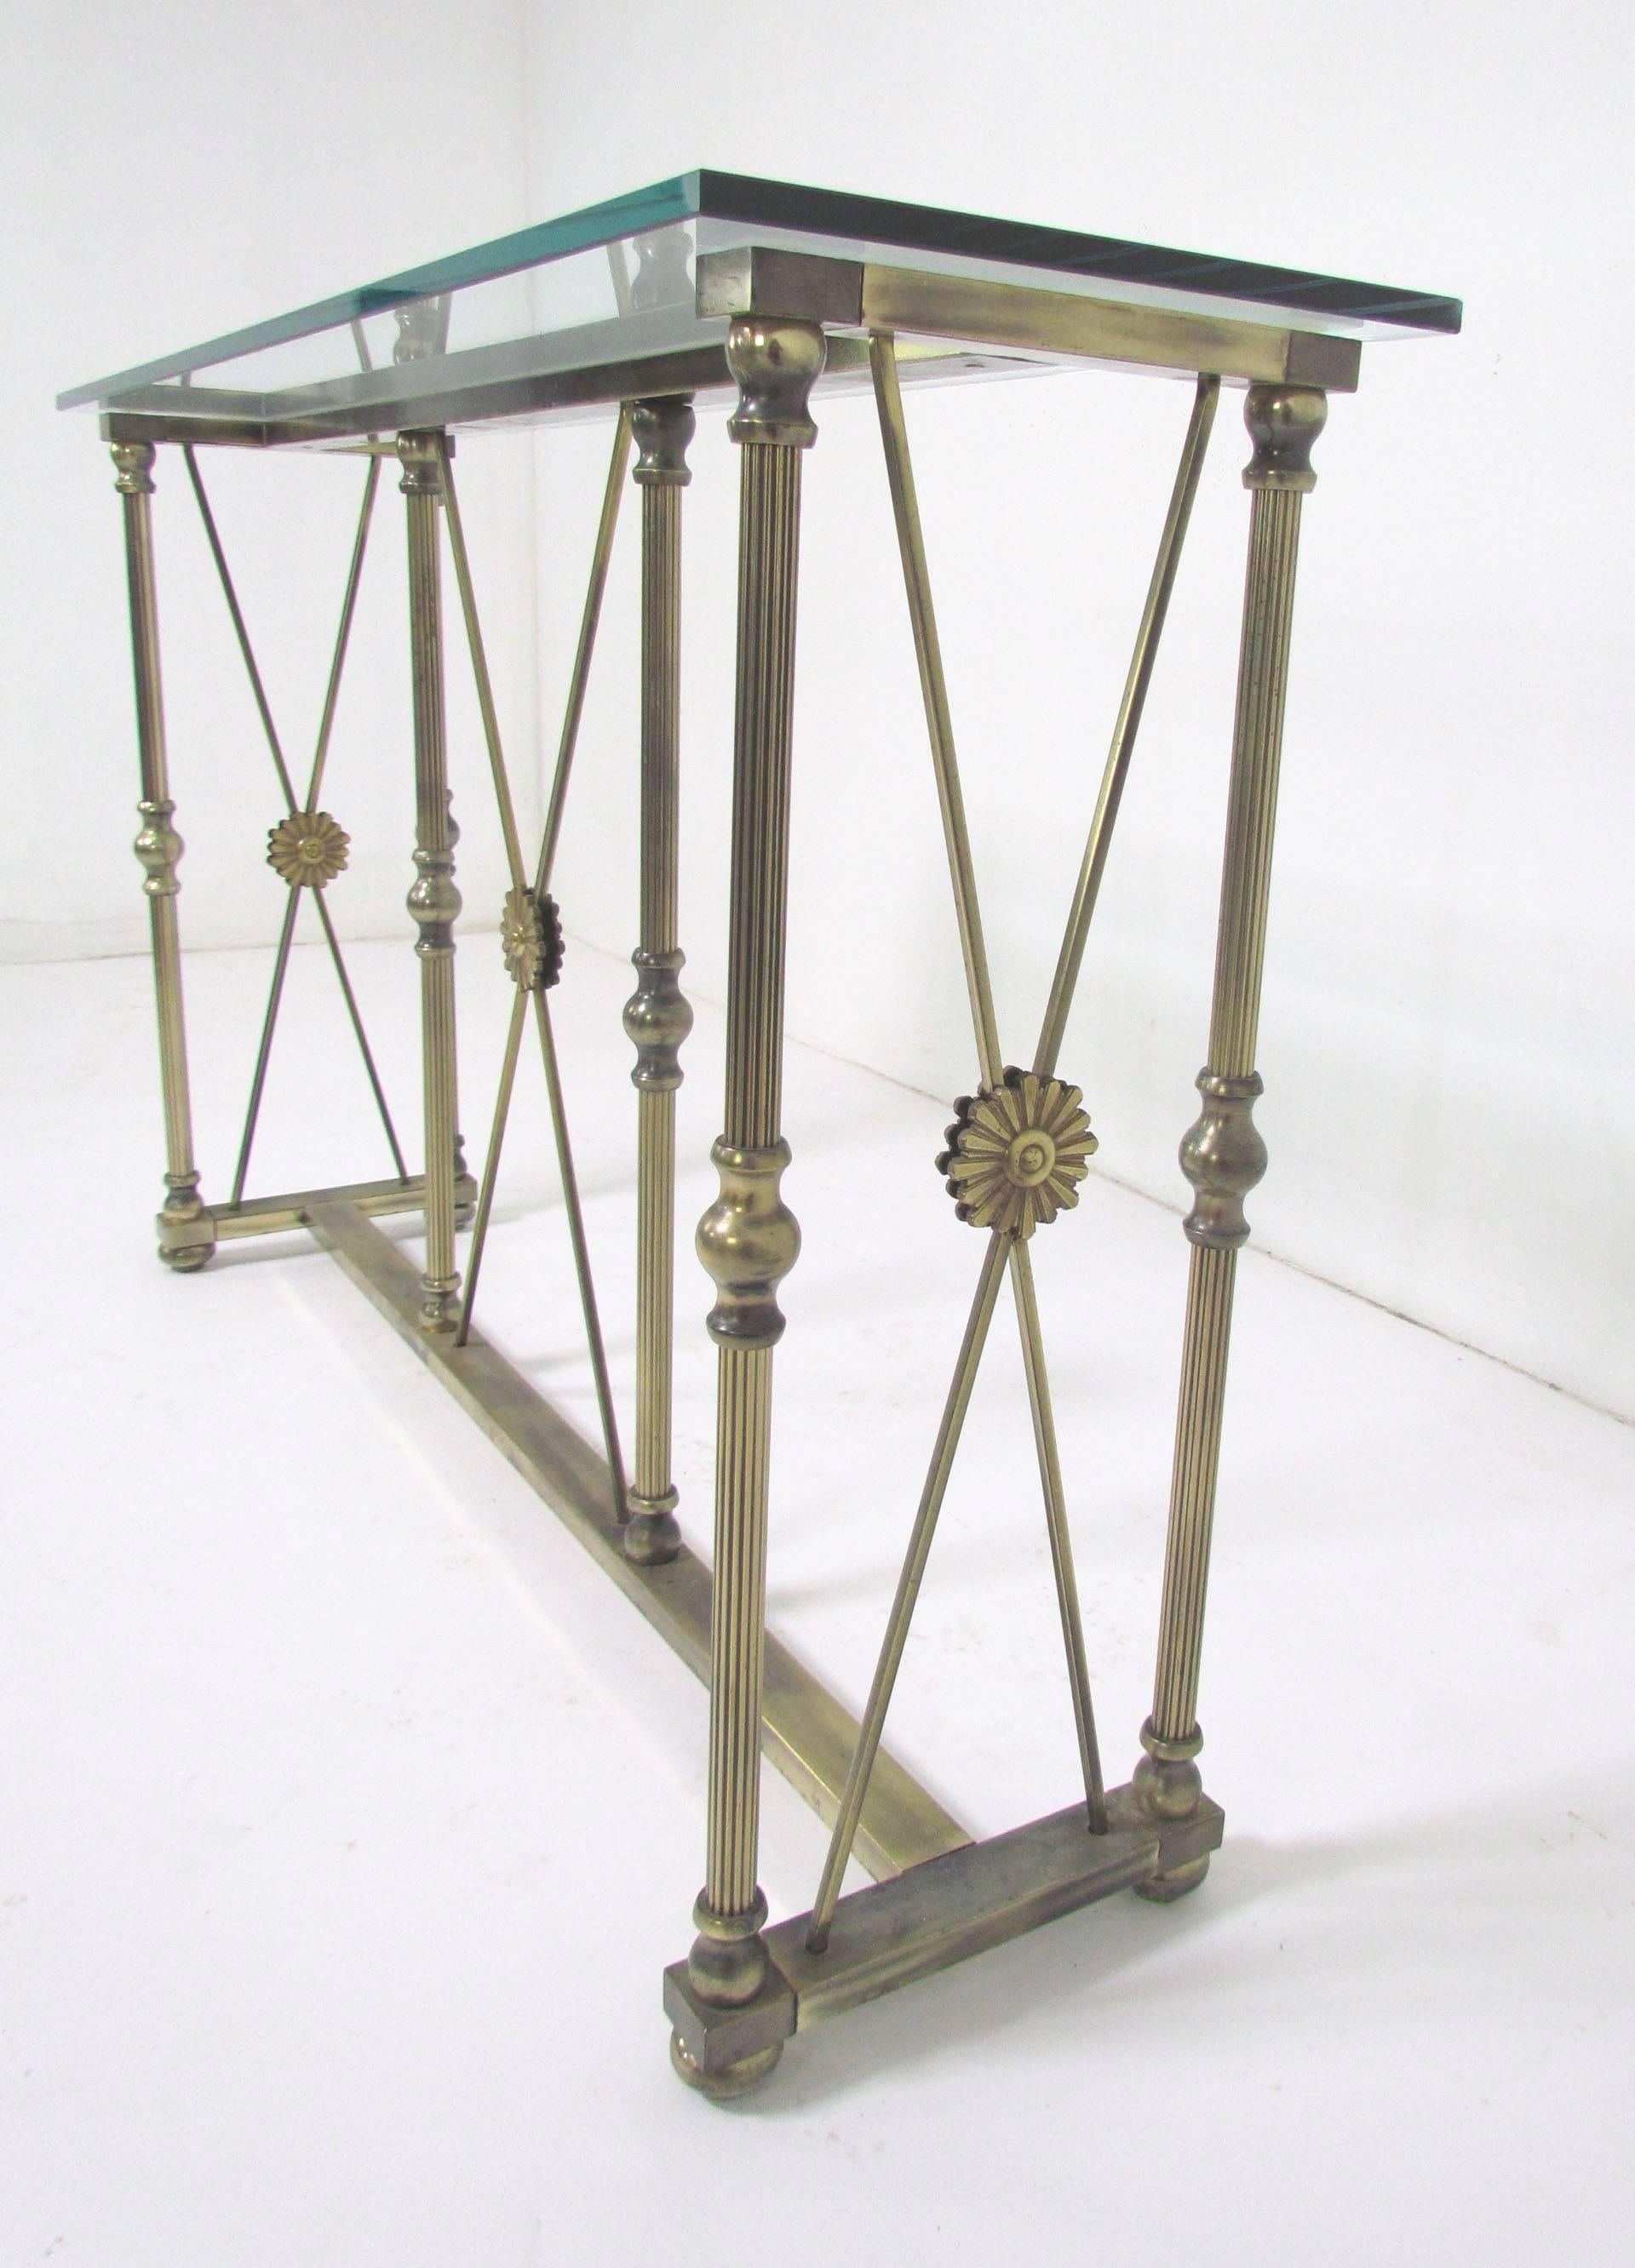 Console or sofa table by Mastercraft, made in Italy. Neoclassical-style medallions decorate all sides. Lovely patina to the brass.